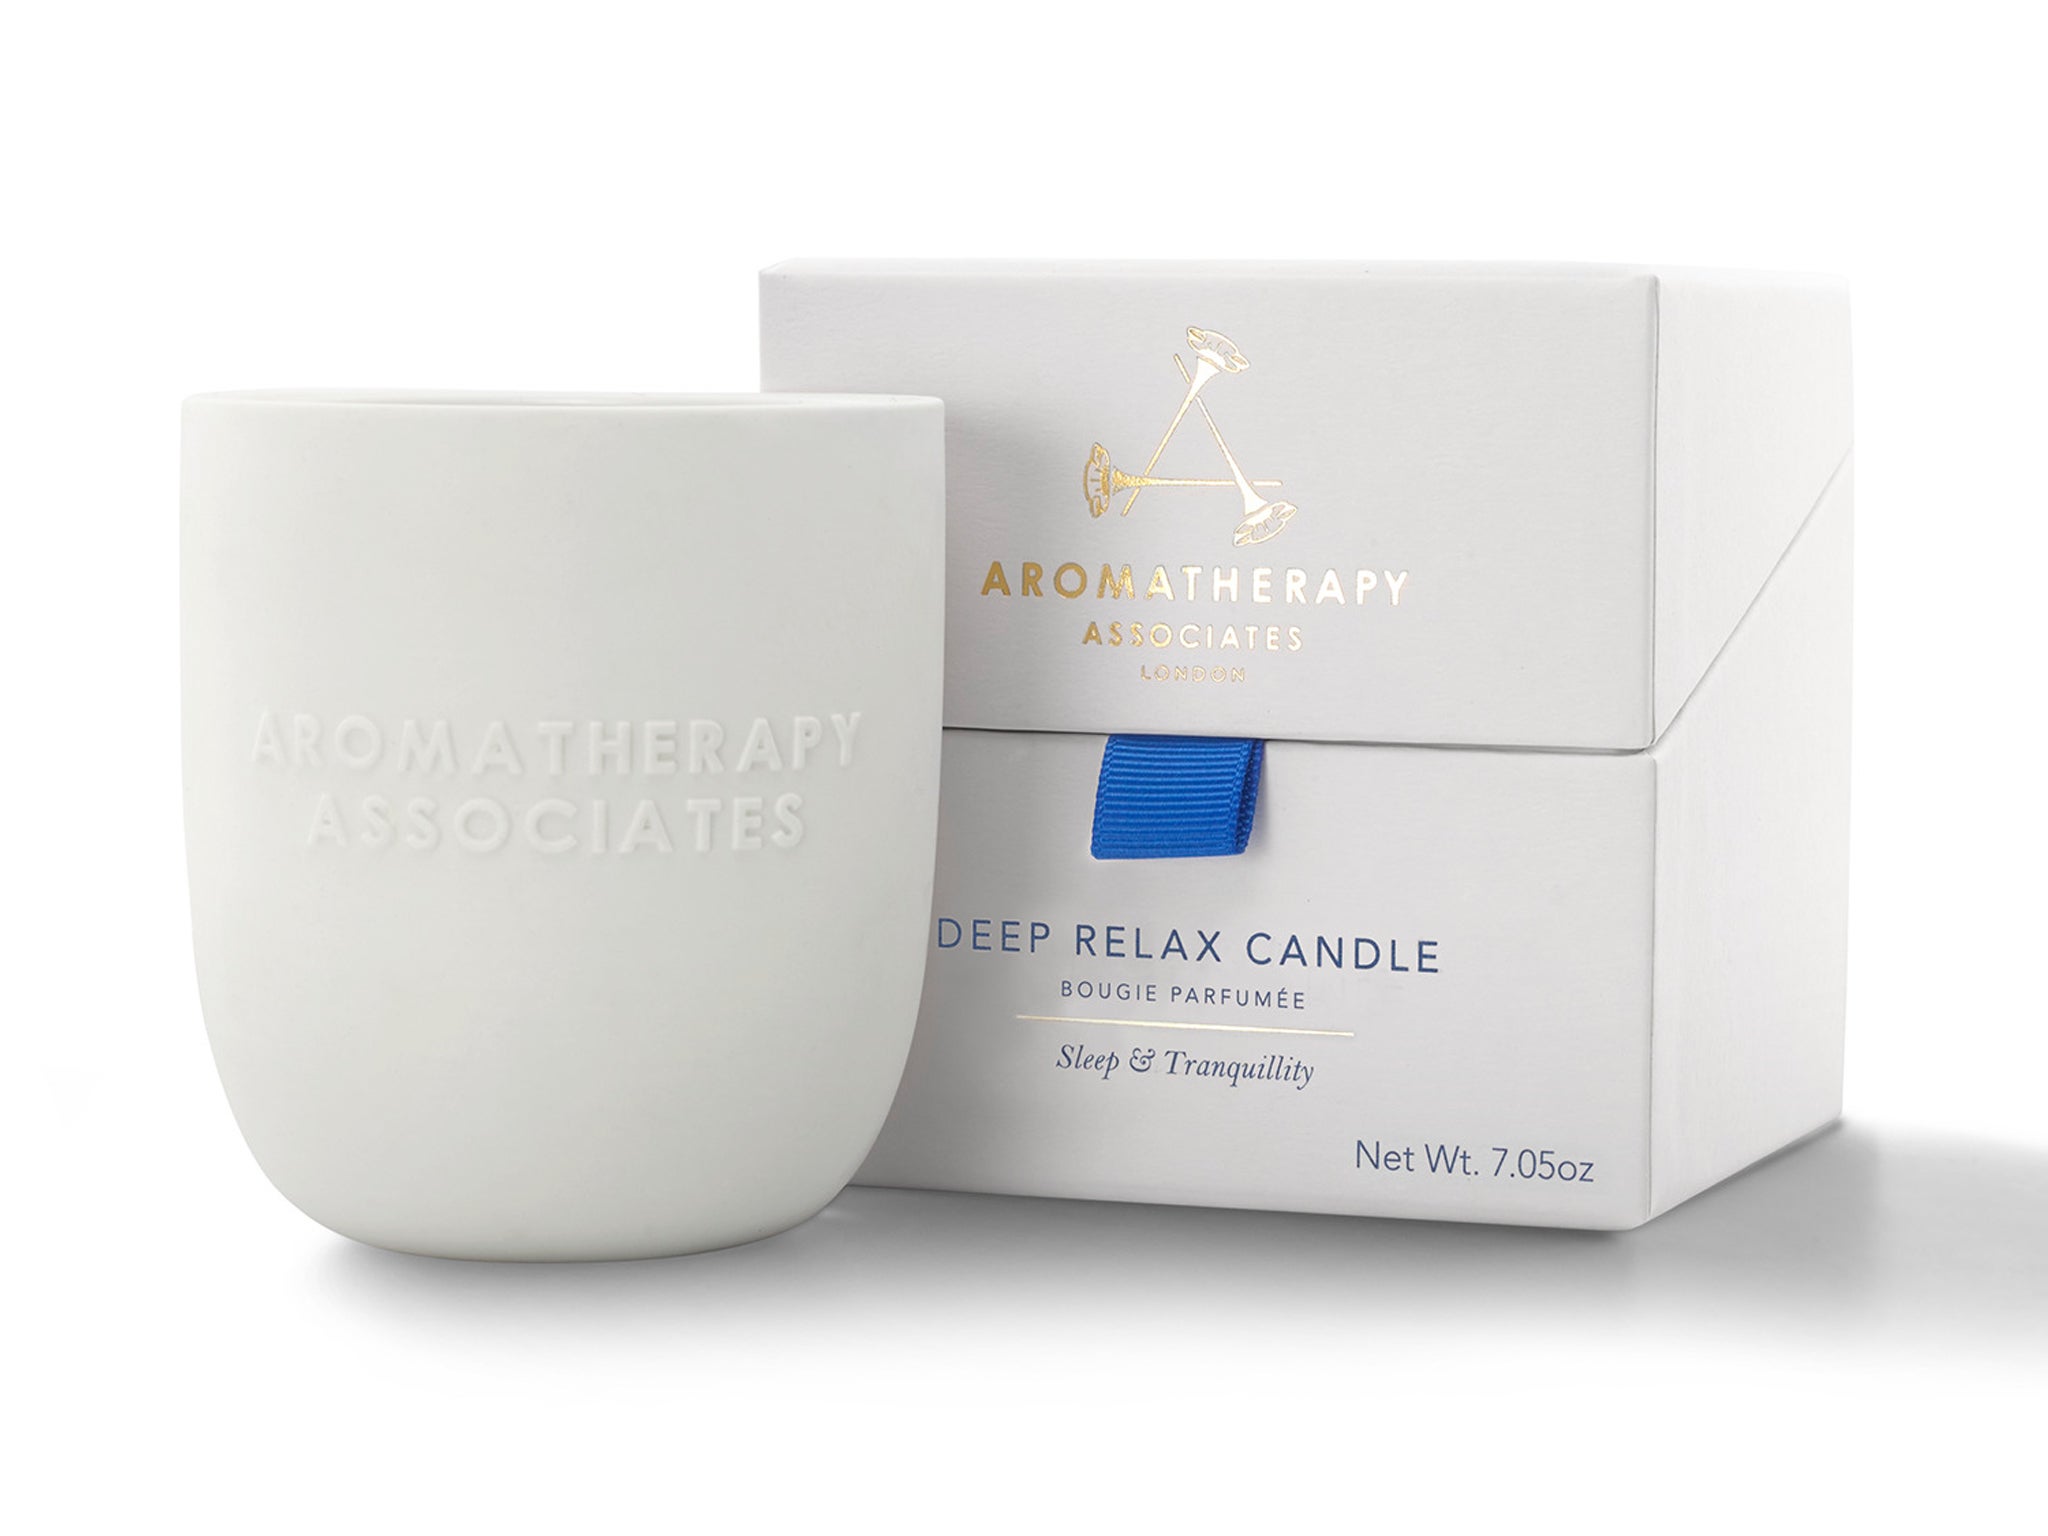 Deep relax candle.jpg